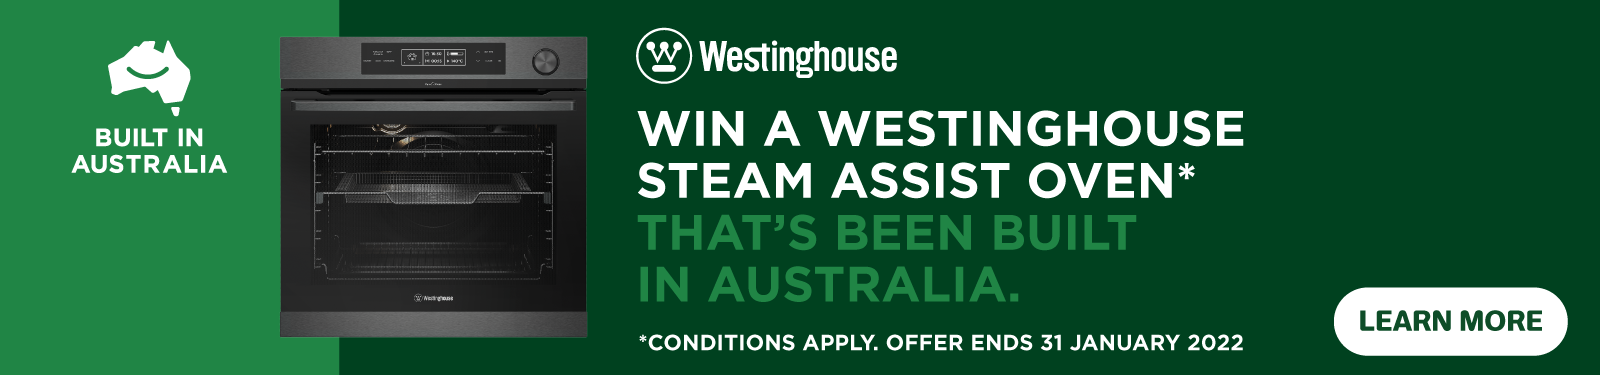 Win A Westinghouse Steam Assist Oven That's Been Built In Australia